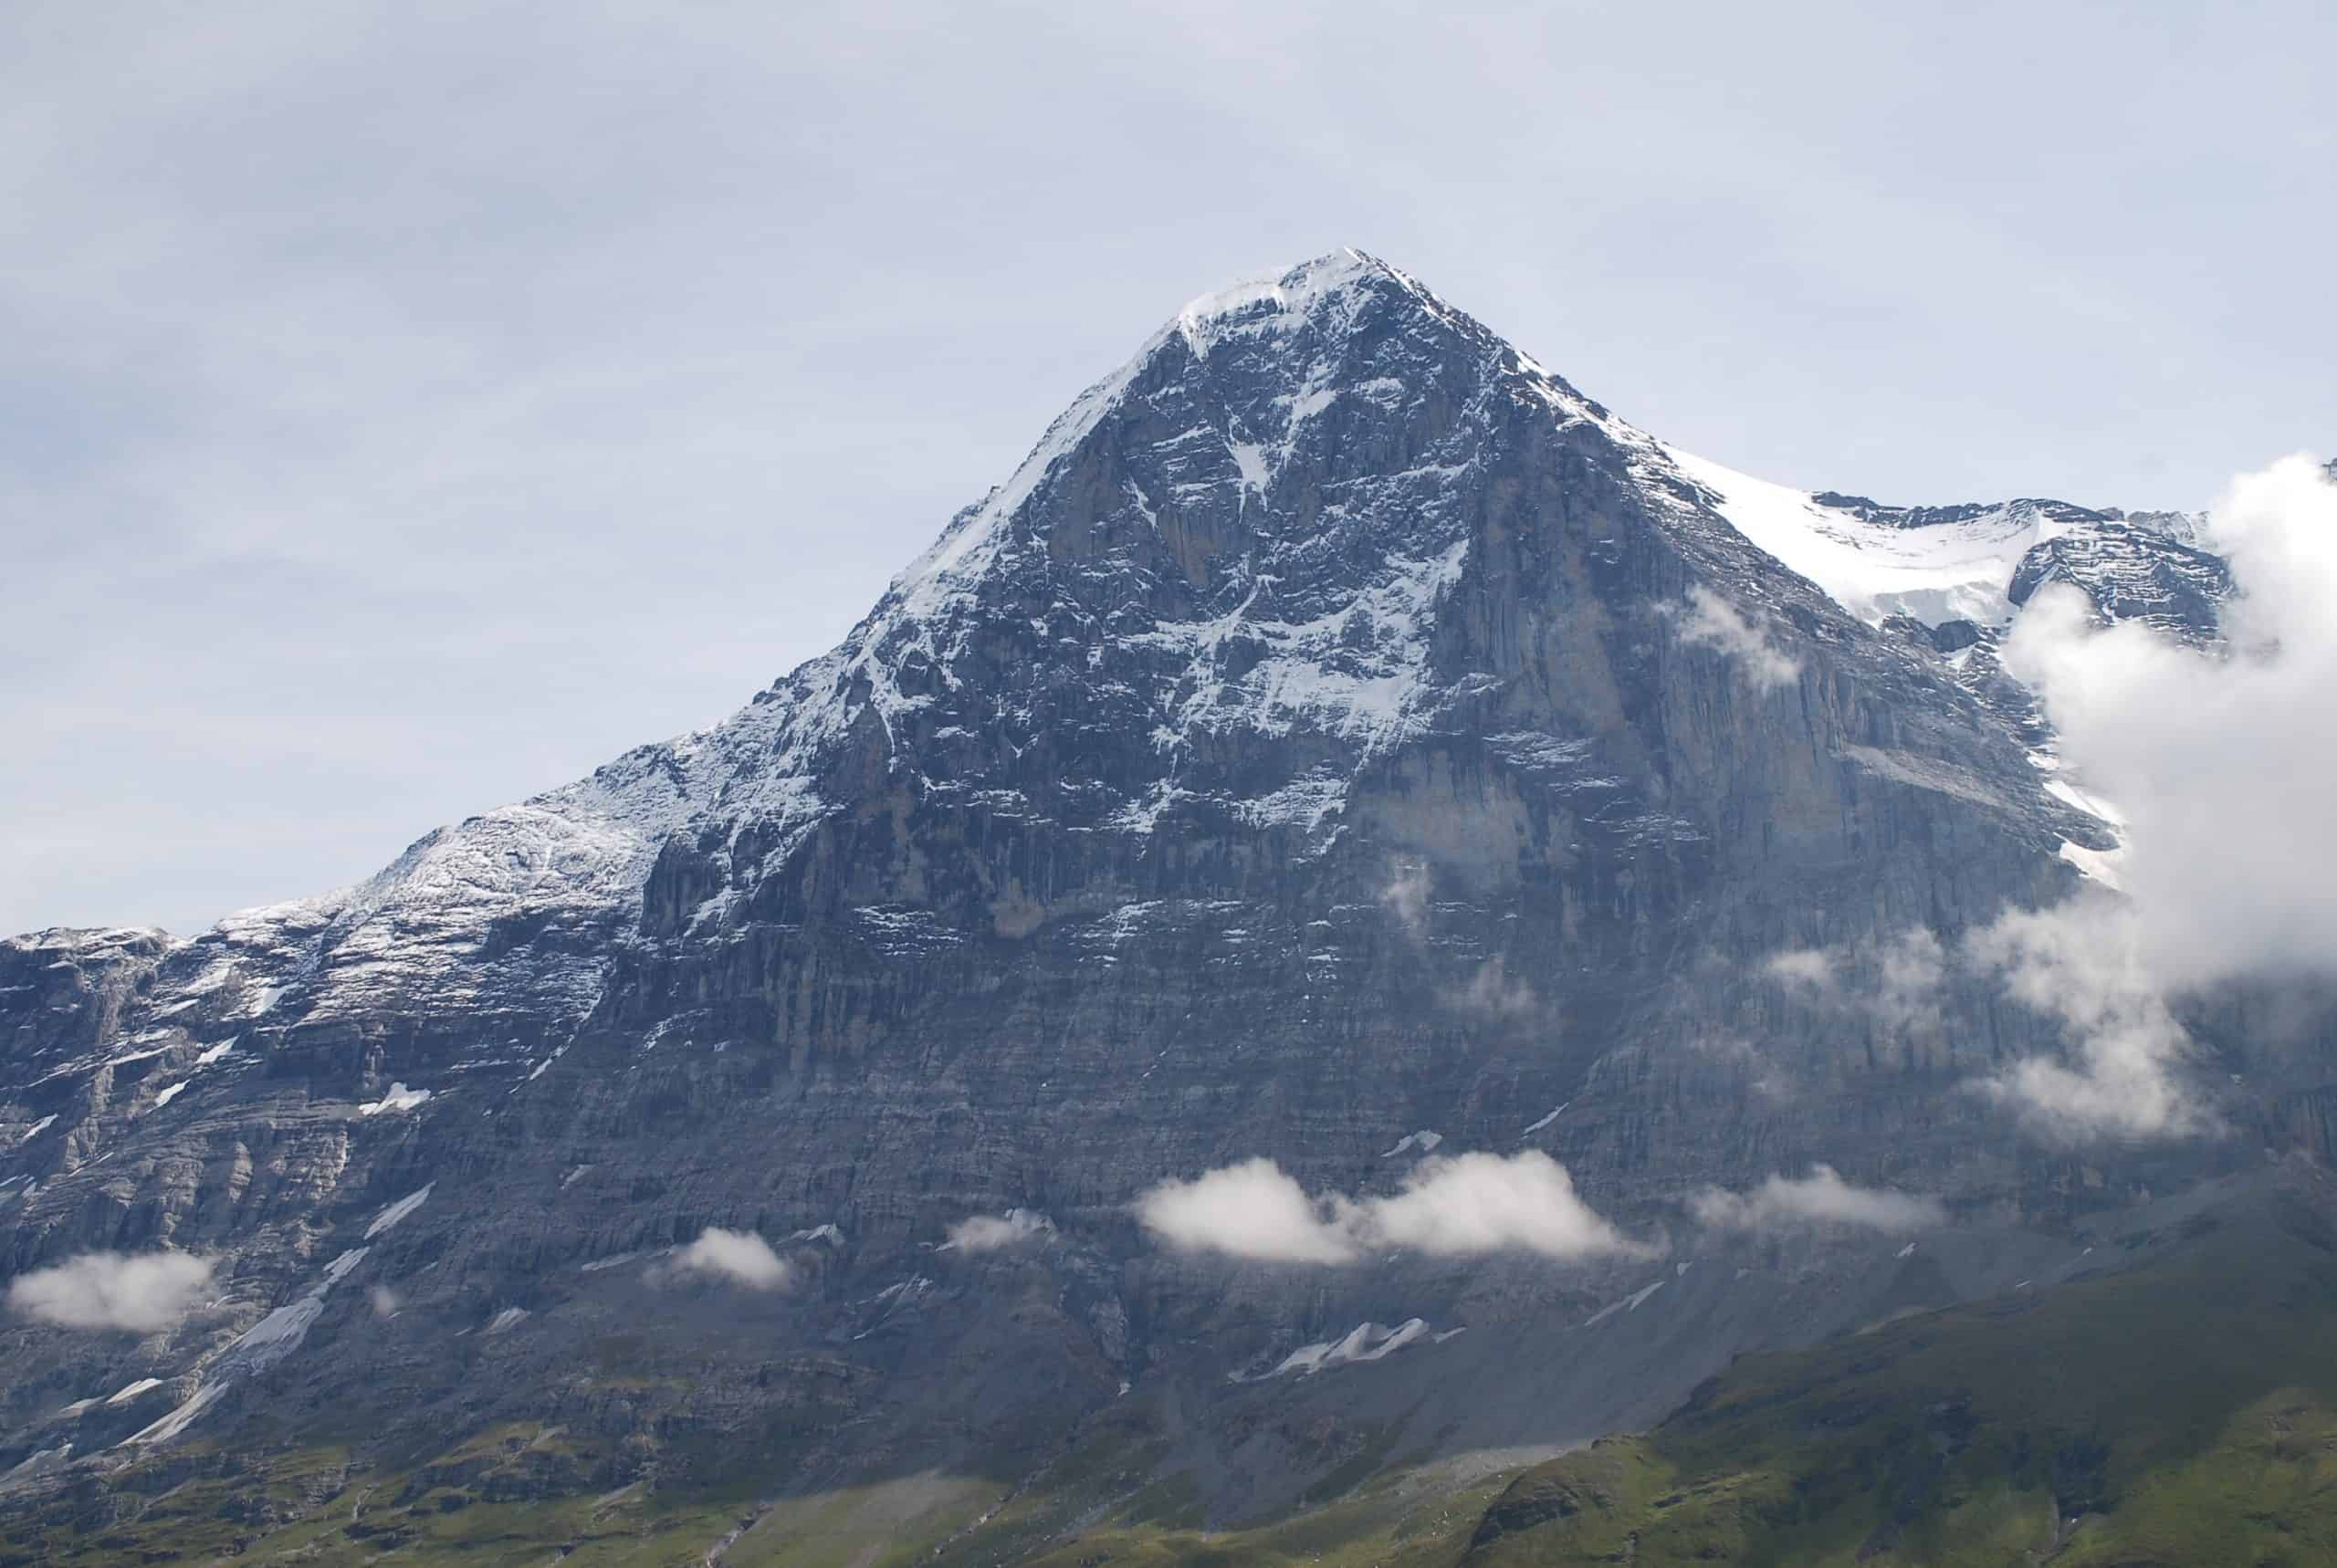 New record for the iconic climbing route on the Eiger!